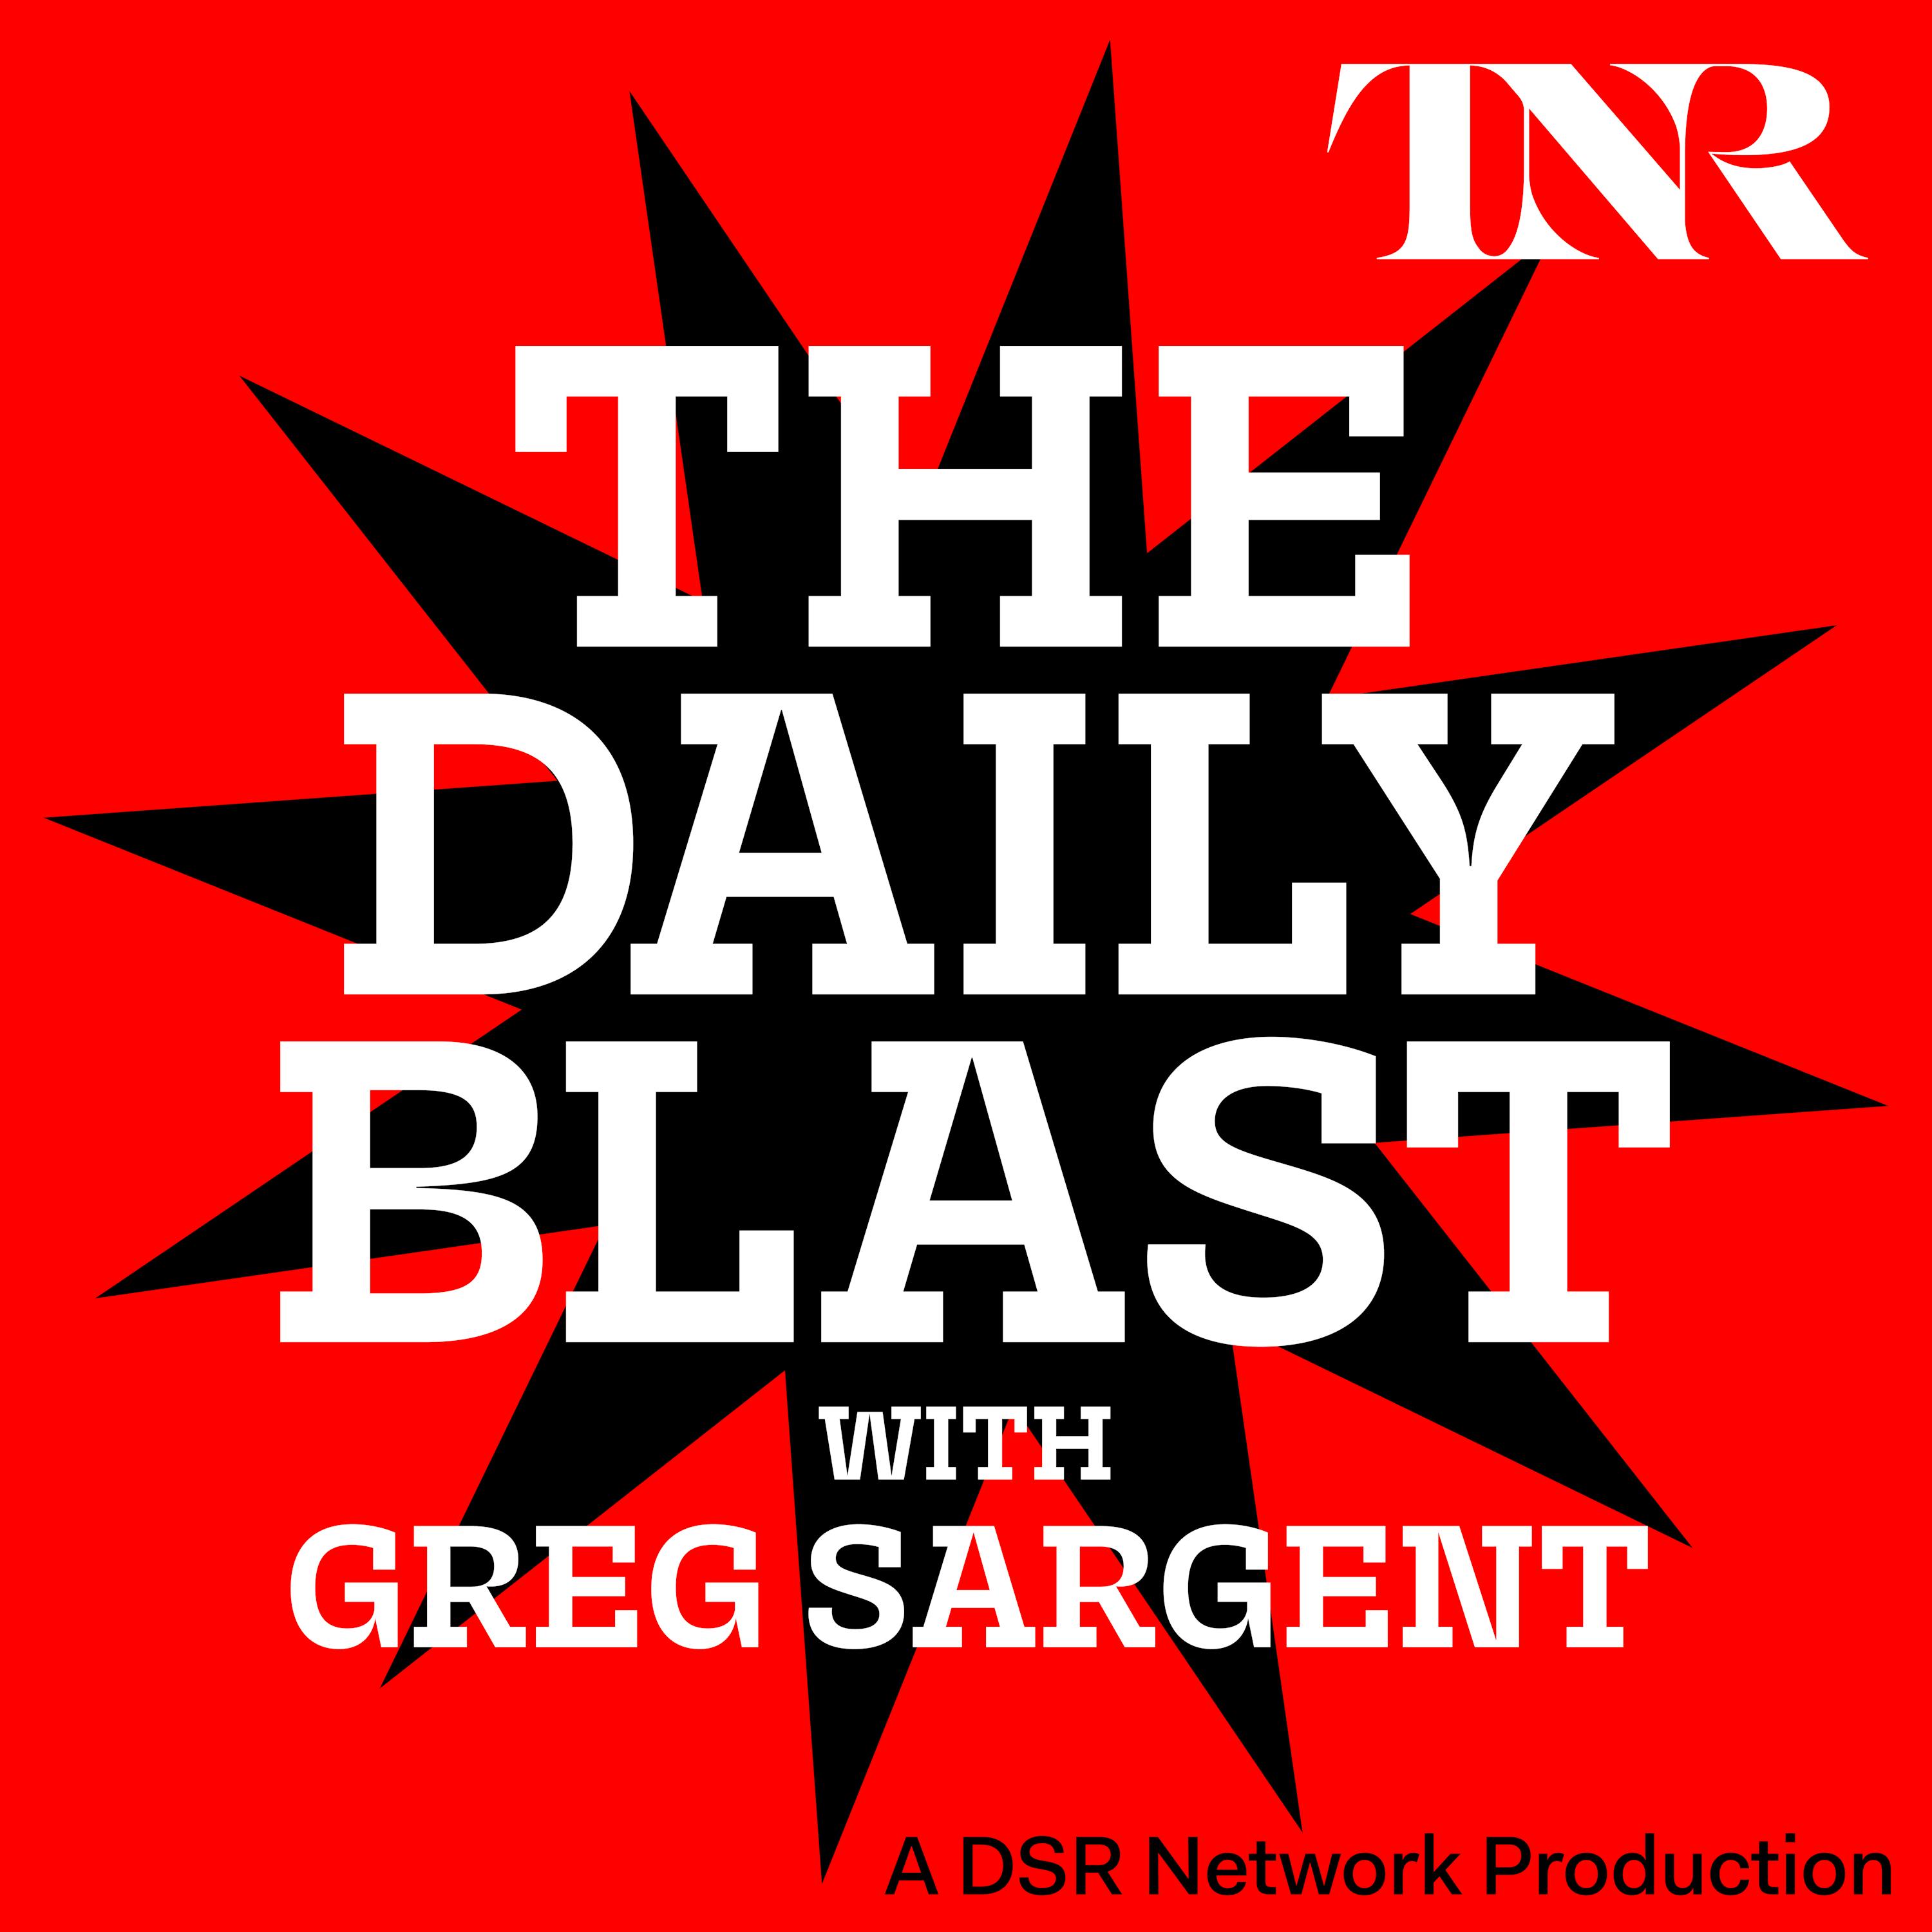 THE DAILY BLAST with Greg Sargent